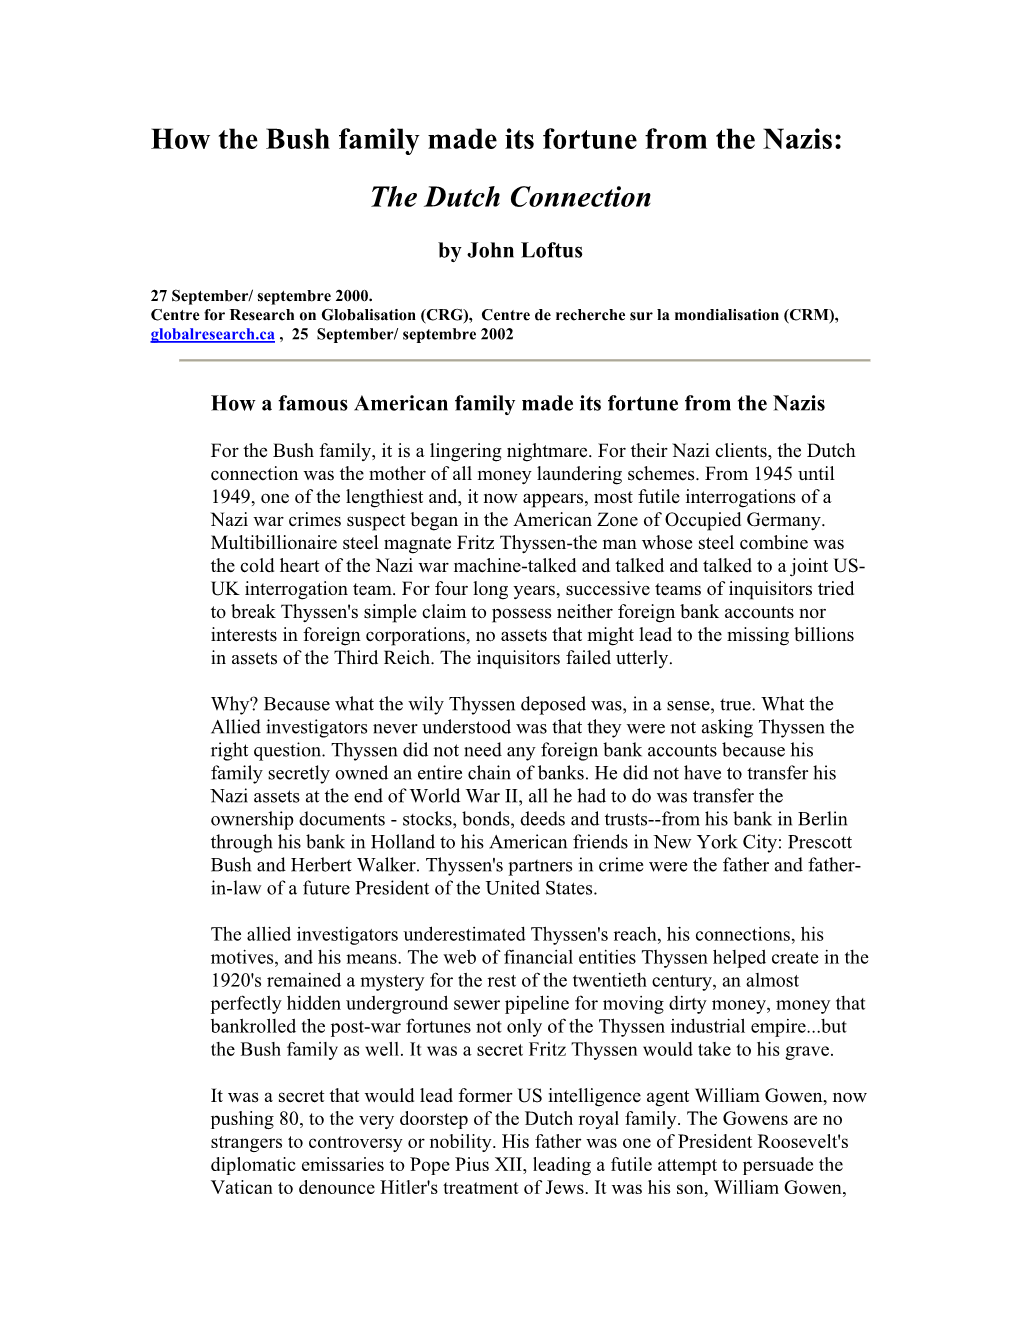 How the Bush Family Made Its Fortune from the Nazis.Pdf